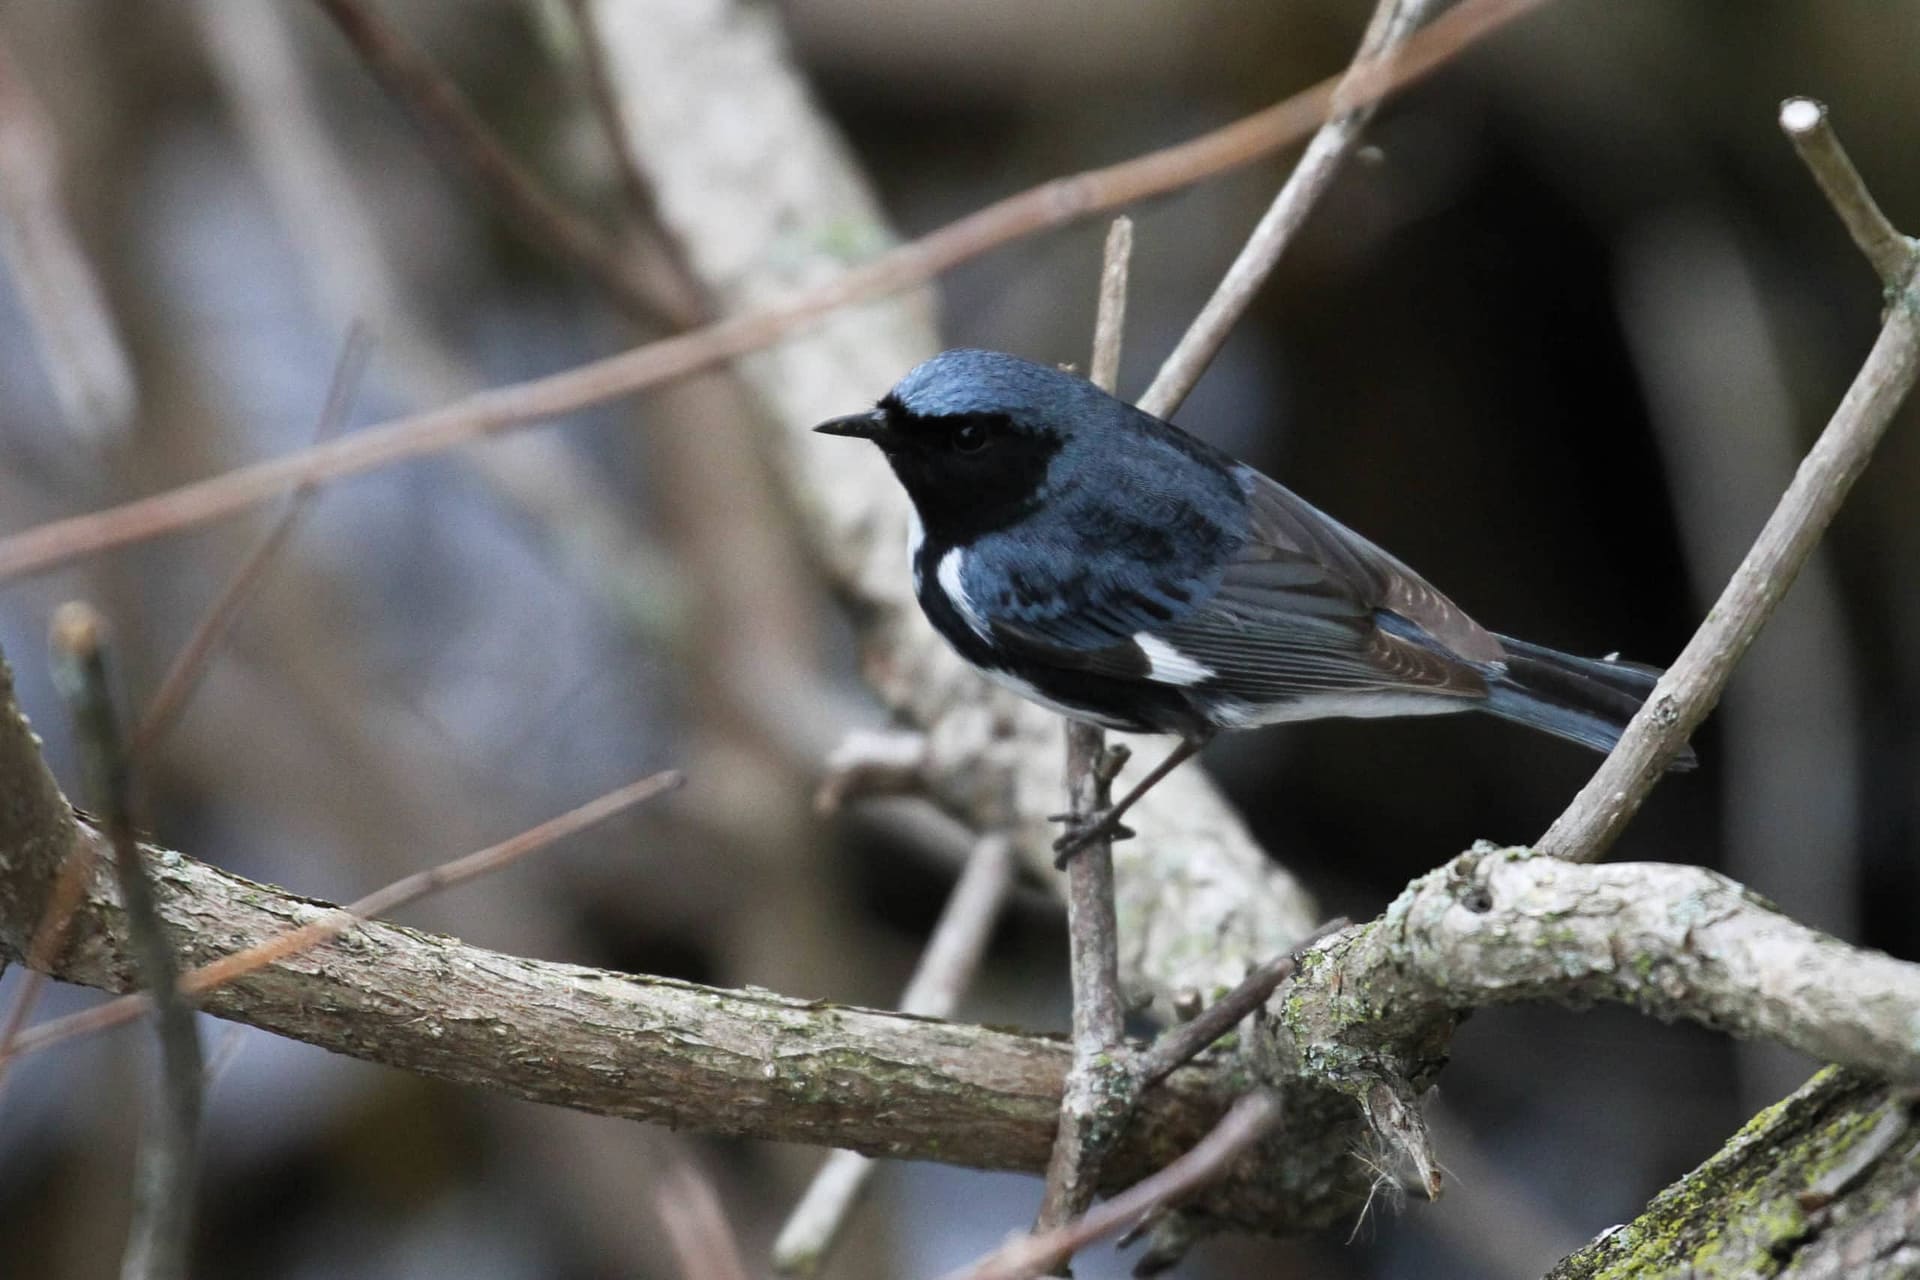 "Cairn's Warbler" - the dark-mantled, southern subspecies of Black-throated Blue Warbler (Photo by Alex Lamoreaux)